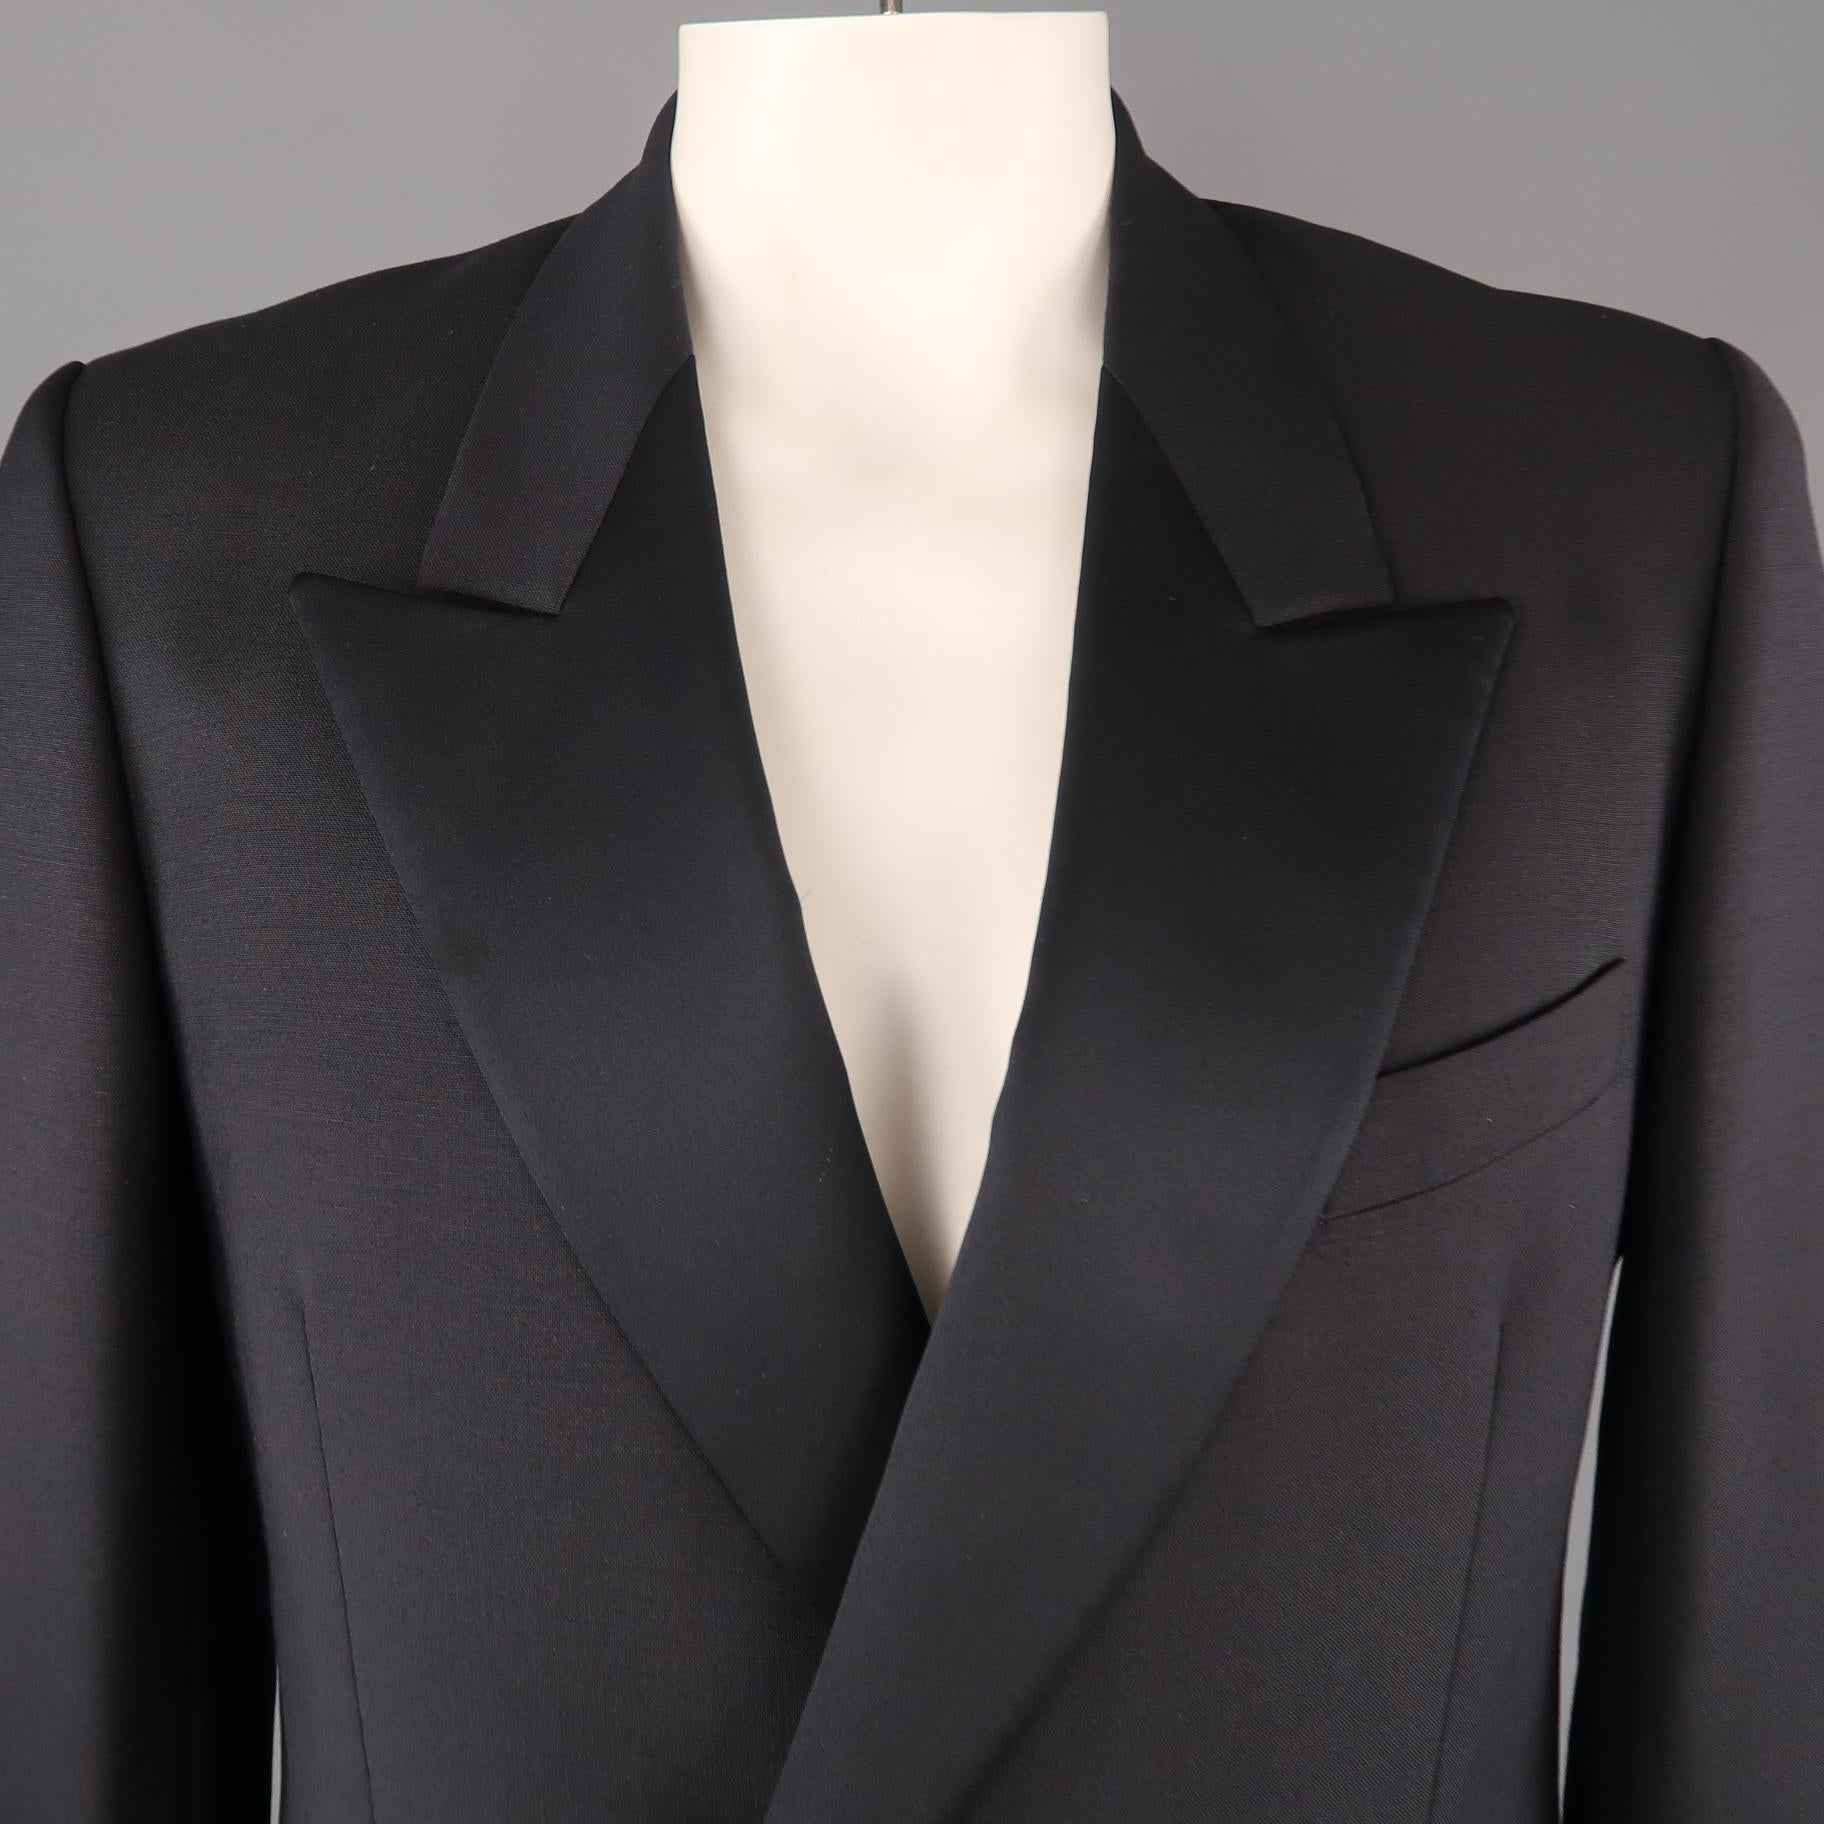 Vintage YVES SAINT LAURENT POUR HOMME sport coat comes in navy wool with a double breasted button front and half satin peak lapel. Made in France.
 
Excellent Pre-Owned Condition.
Marked: (no size)
 
Measurements:
 
Shoulder: 18 in.
Chest: 44